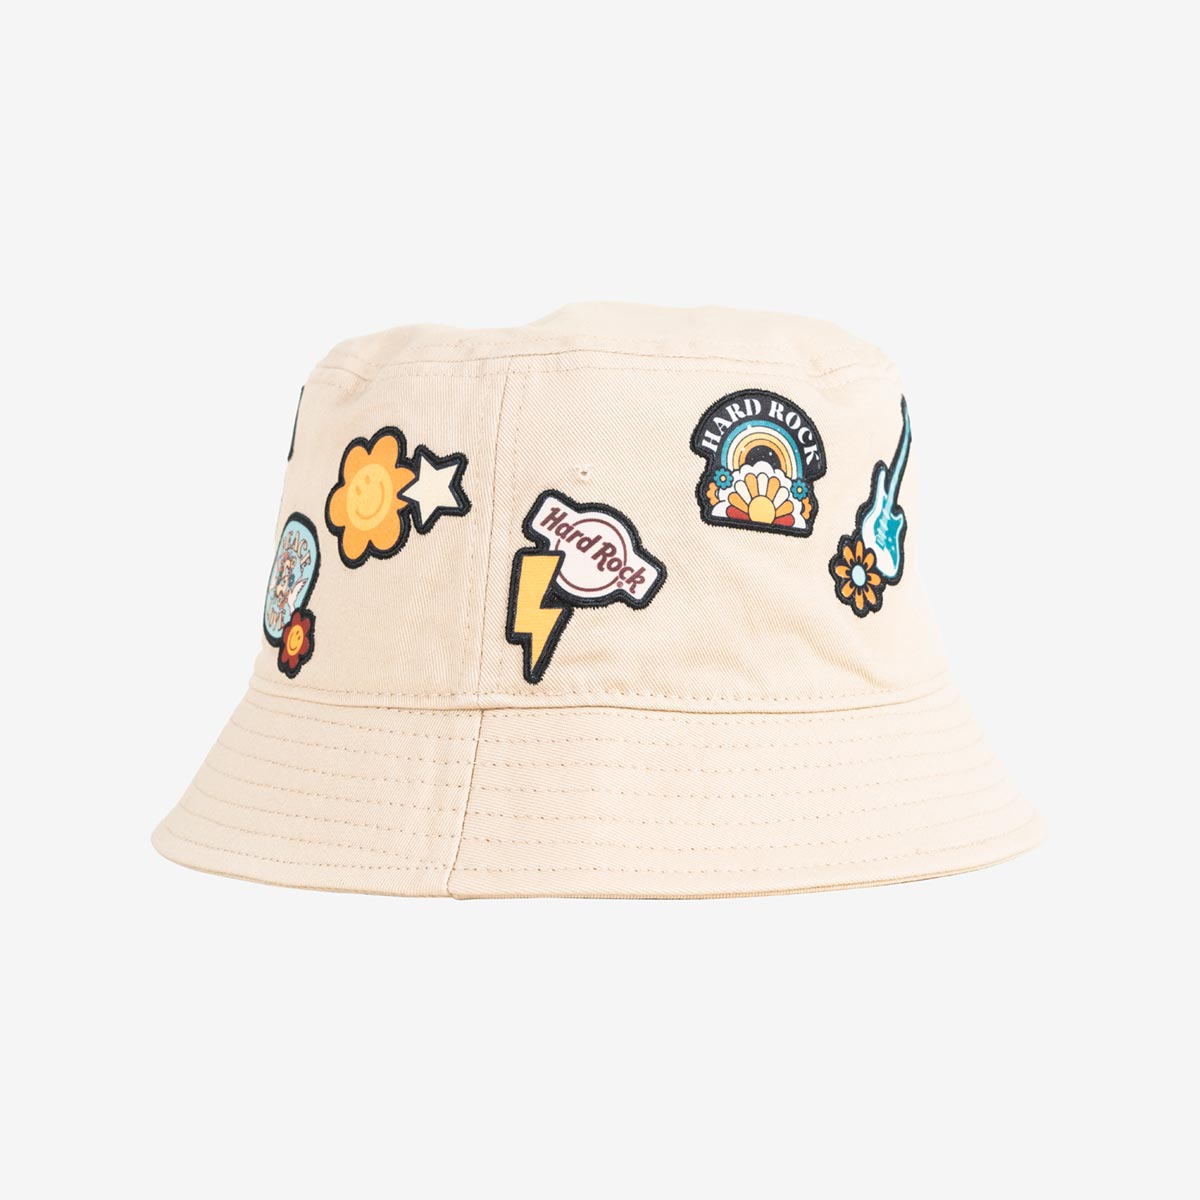 Hard Rock Music Festival Bucket Hat with Patches in Khaki image number 2